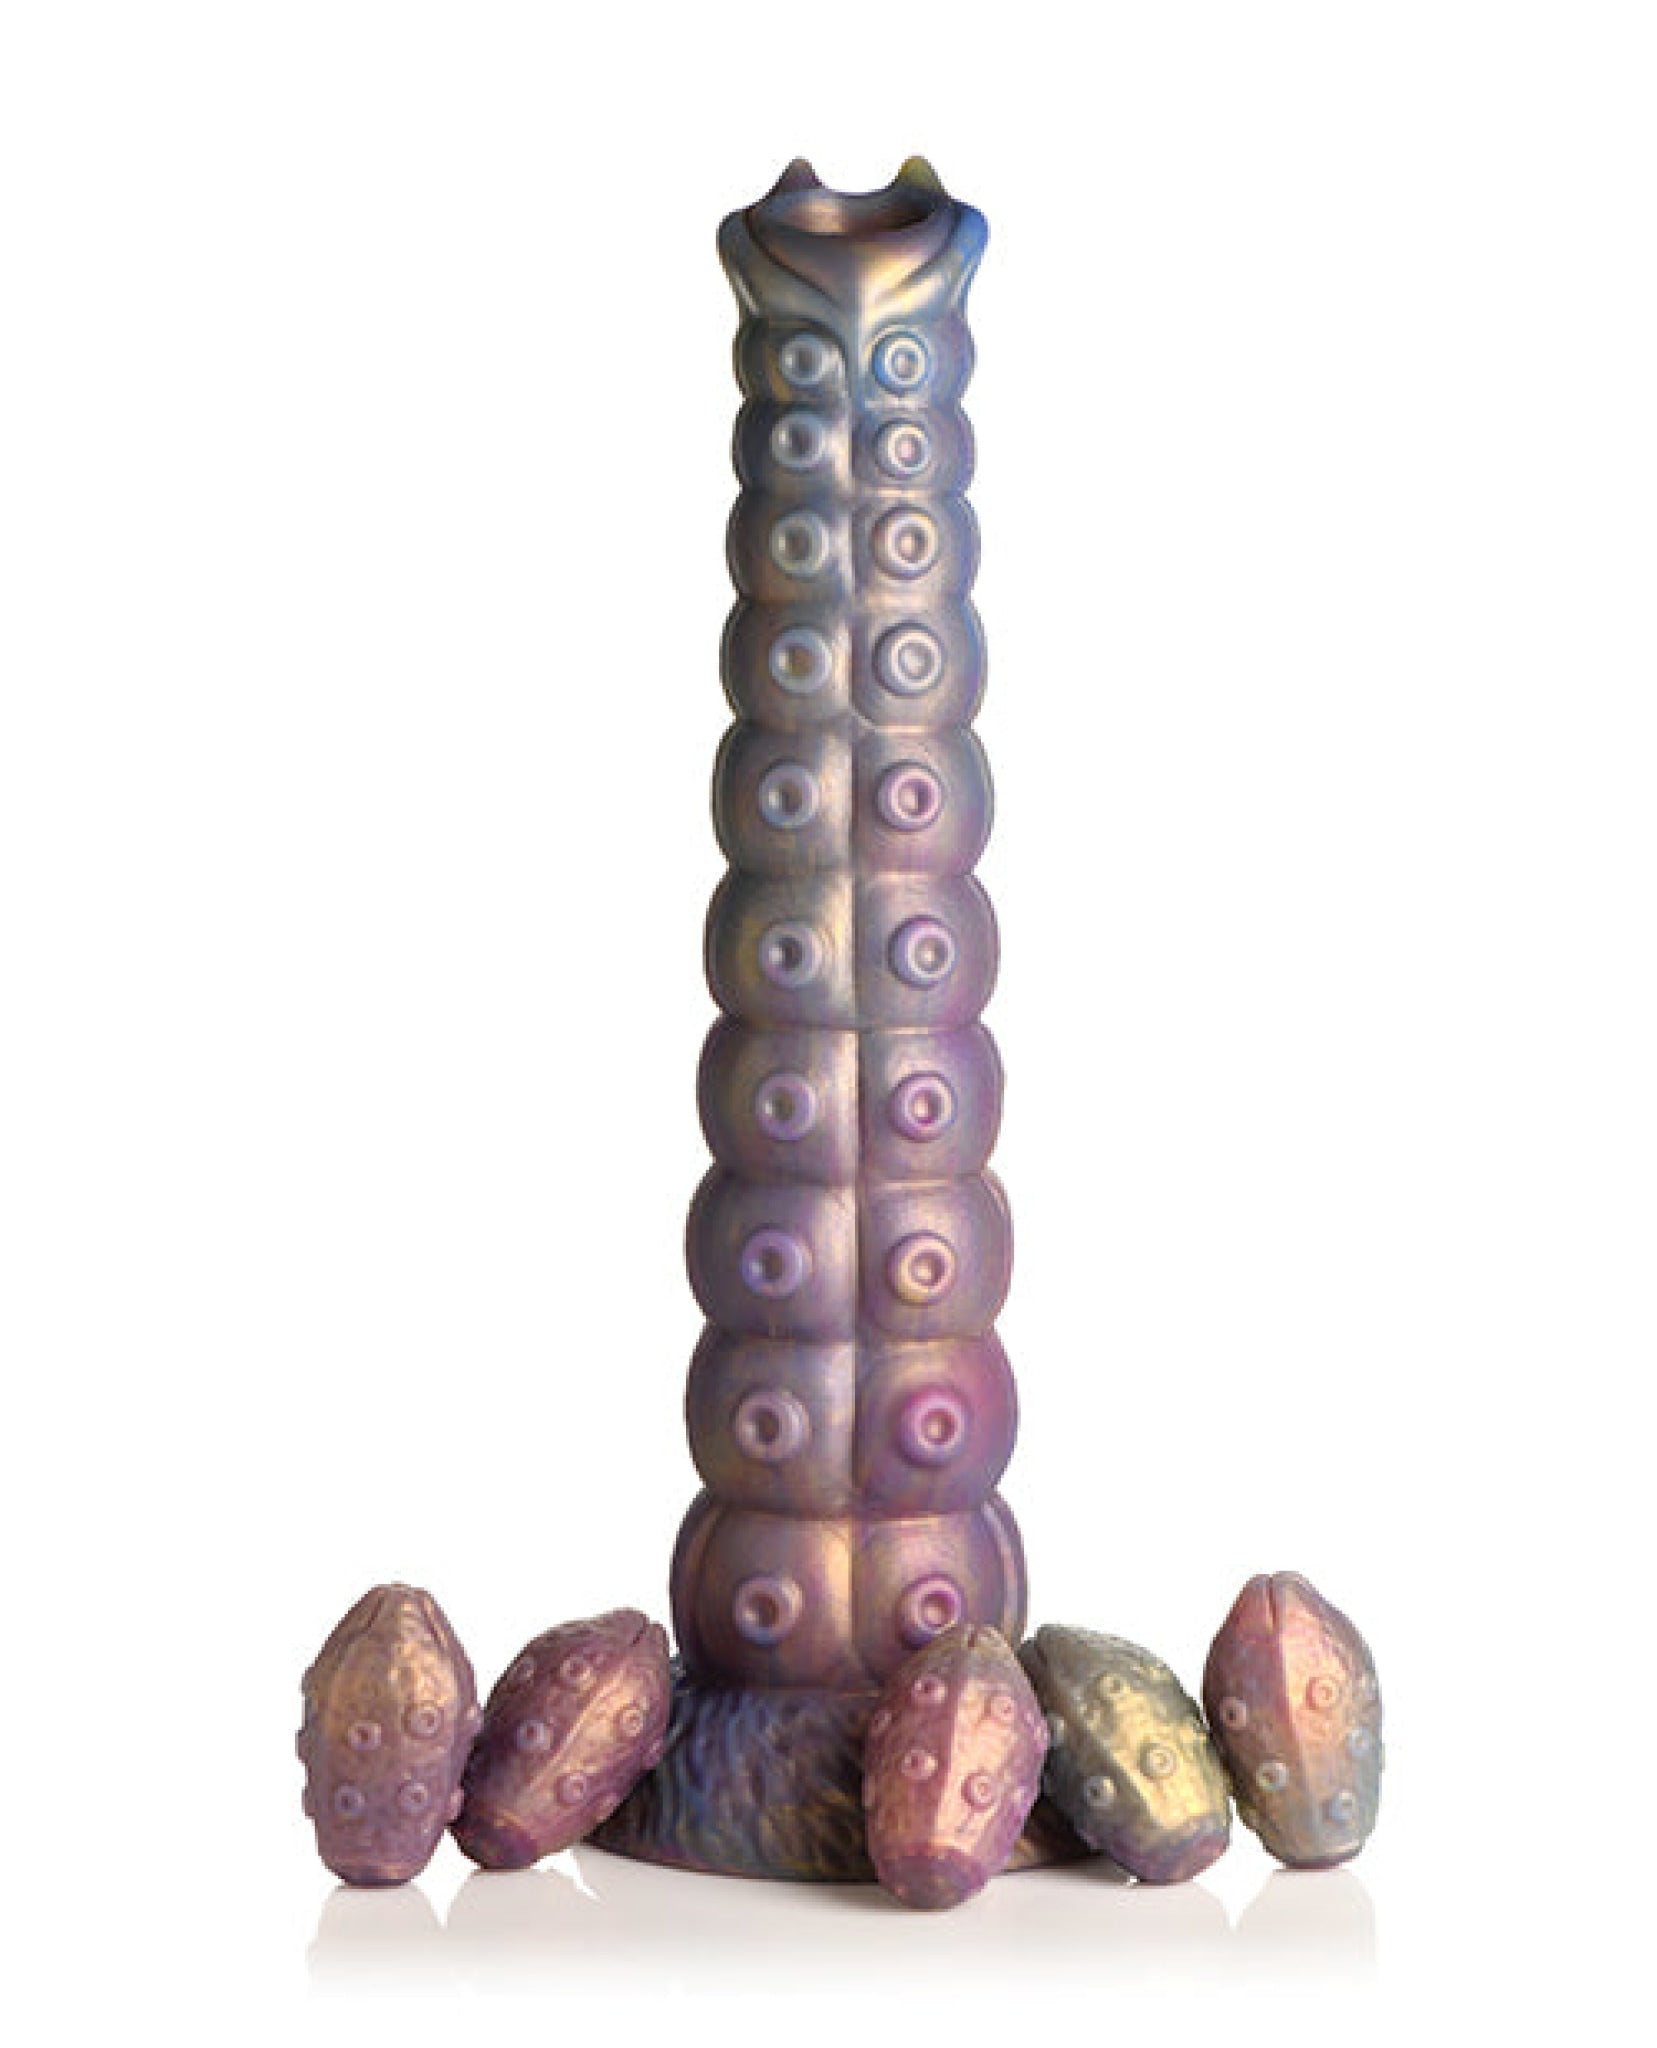 Creature Cocks Deep Invader Tentacle Ovipositor Silicone Dildo w/Eggs - Multi Color Xr LLC